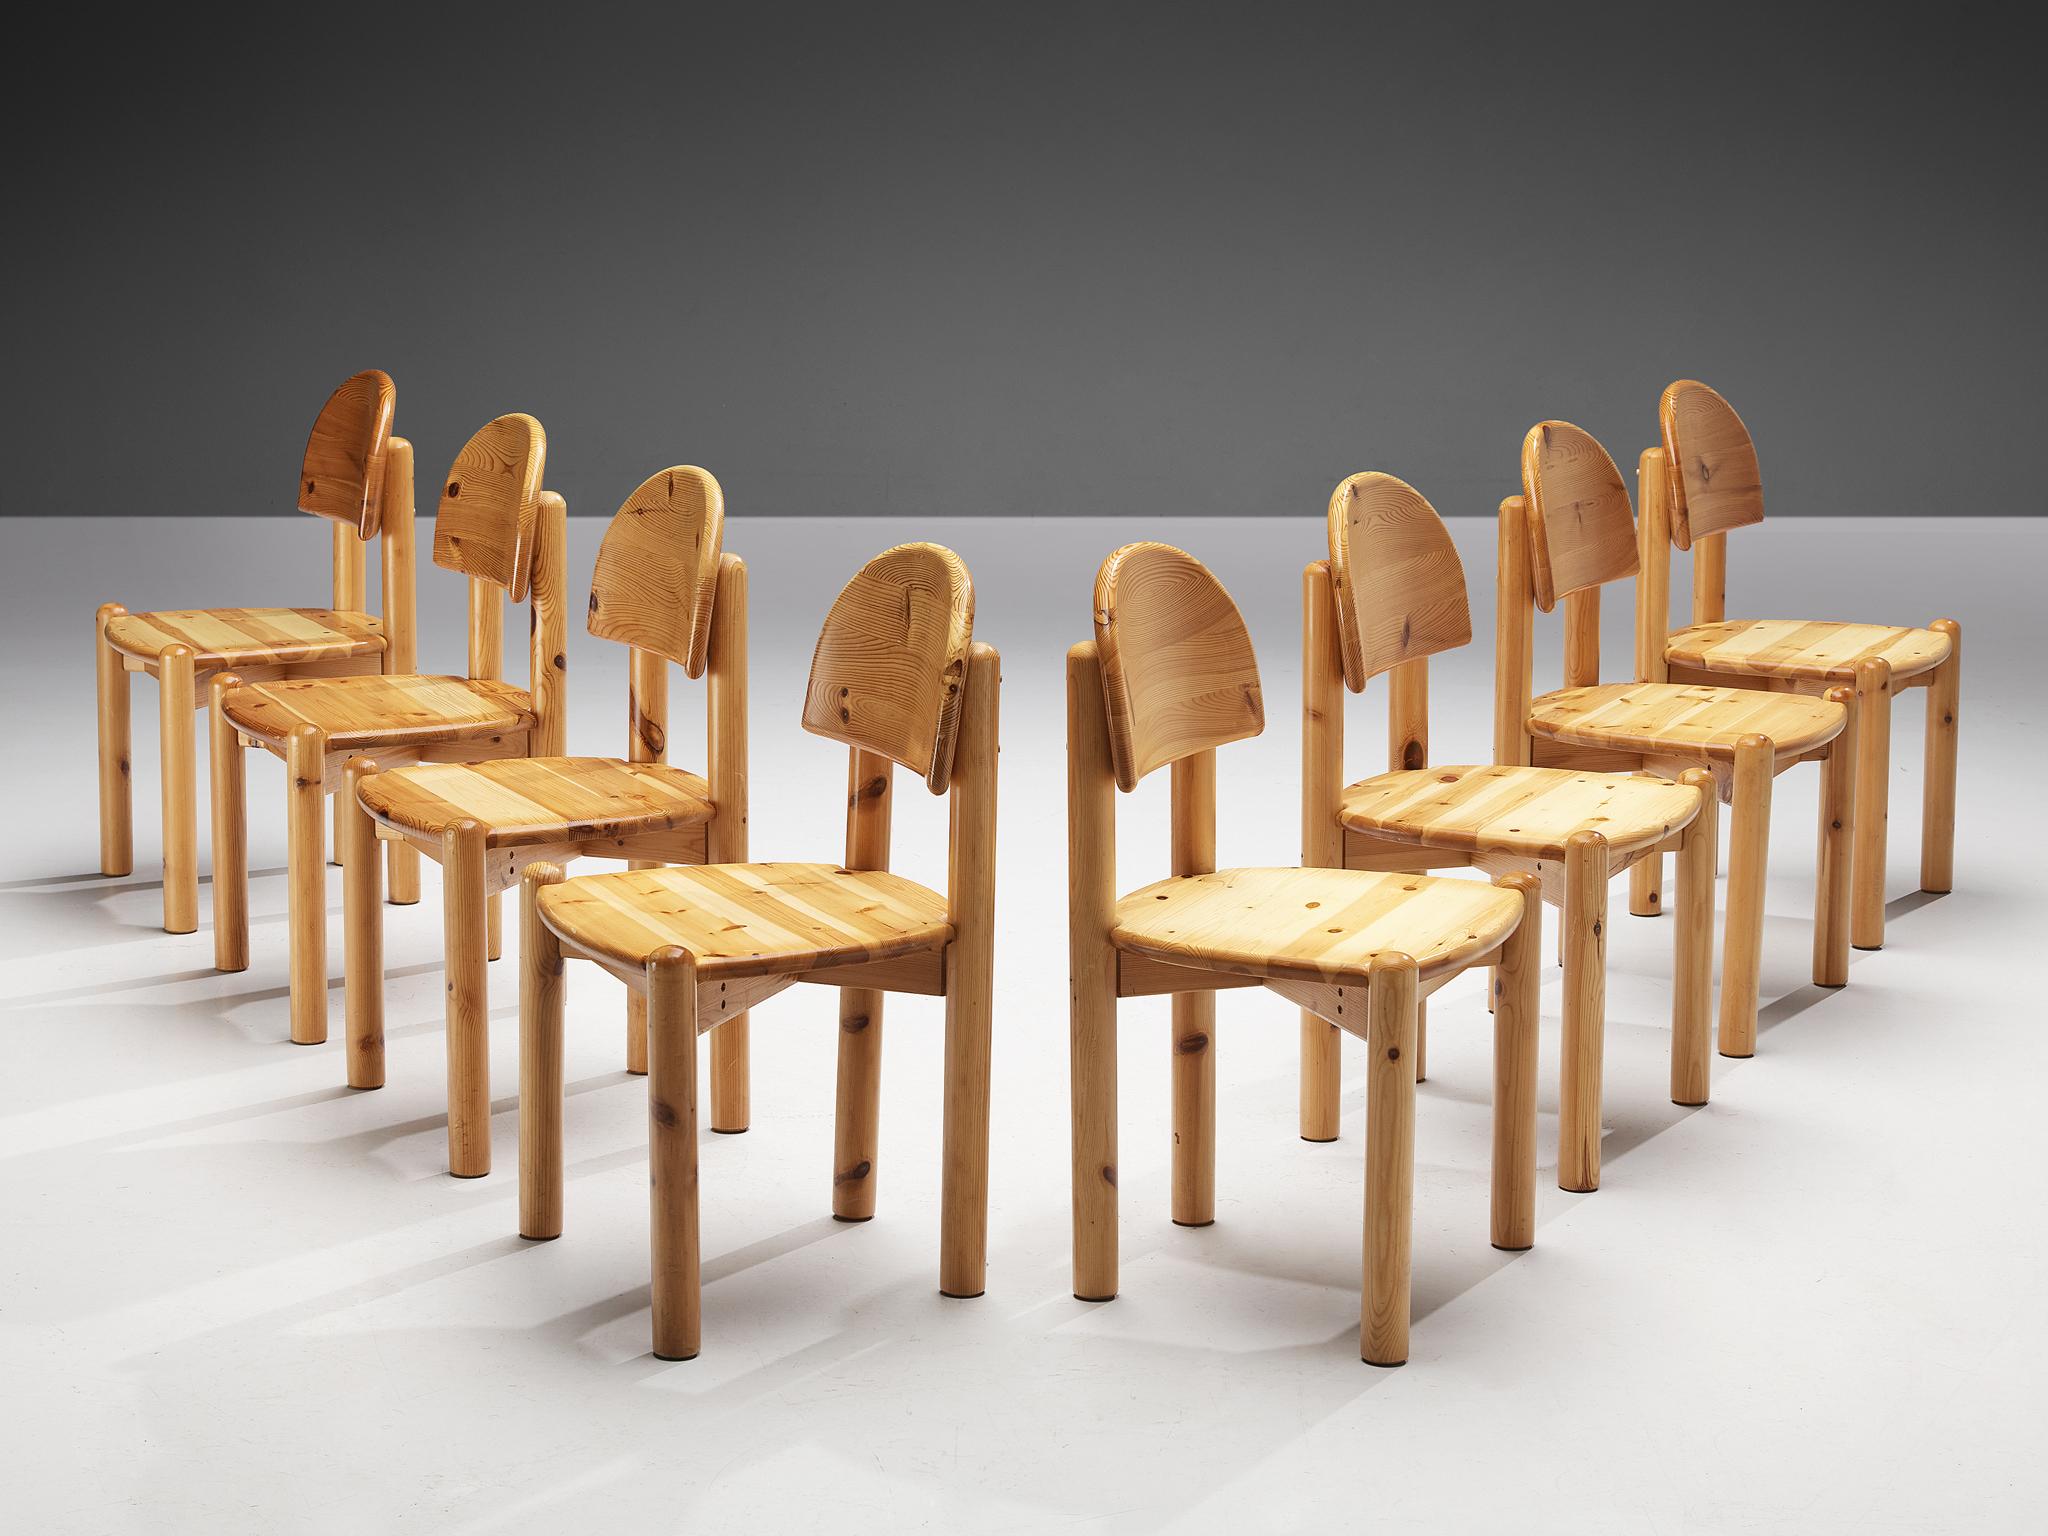 Dining chairs, pine, Denmark 1970s. 

Beautiful, organic and natural dining chairs in solid pine. A simplistic design with a round seating and attention for the natural expression and grain of the wood. These chairs hold a beautiful curved back and